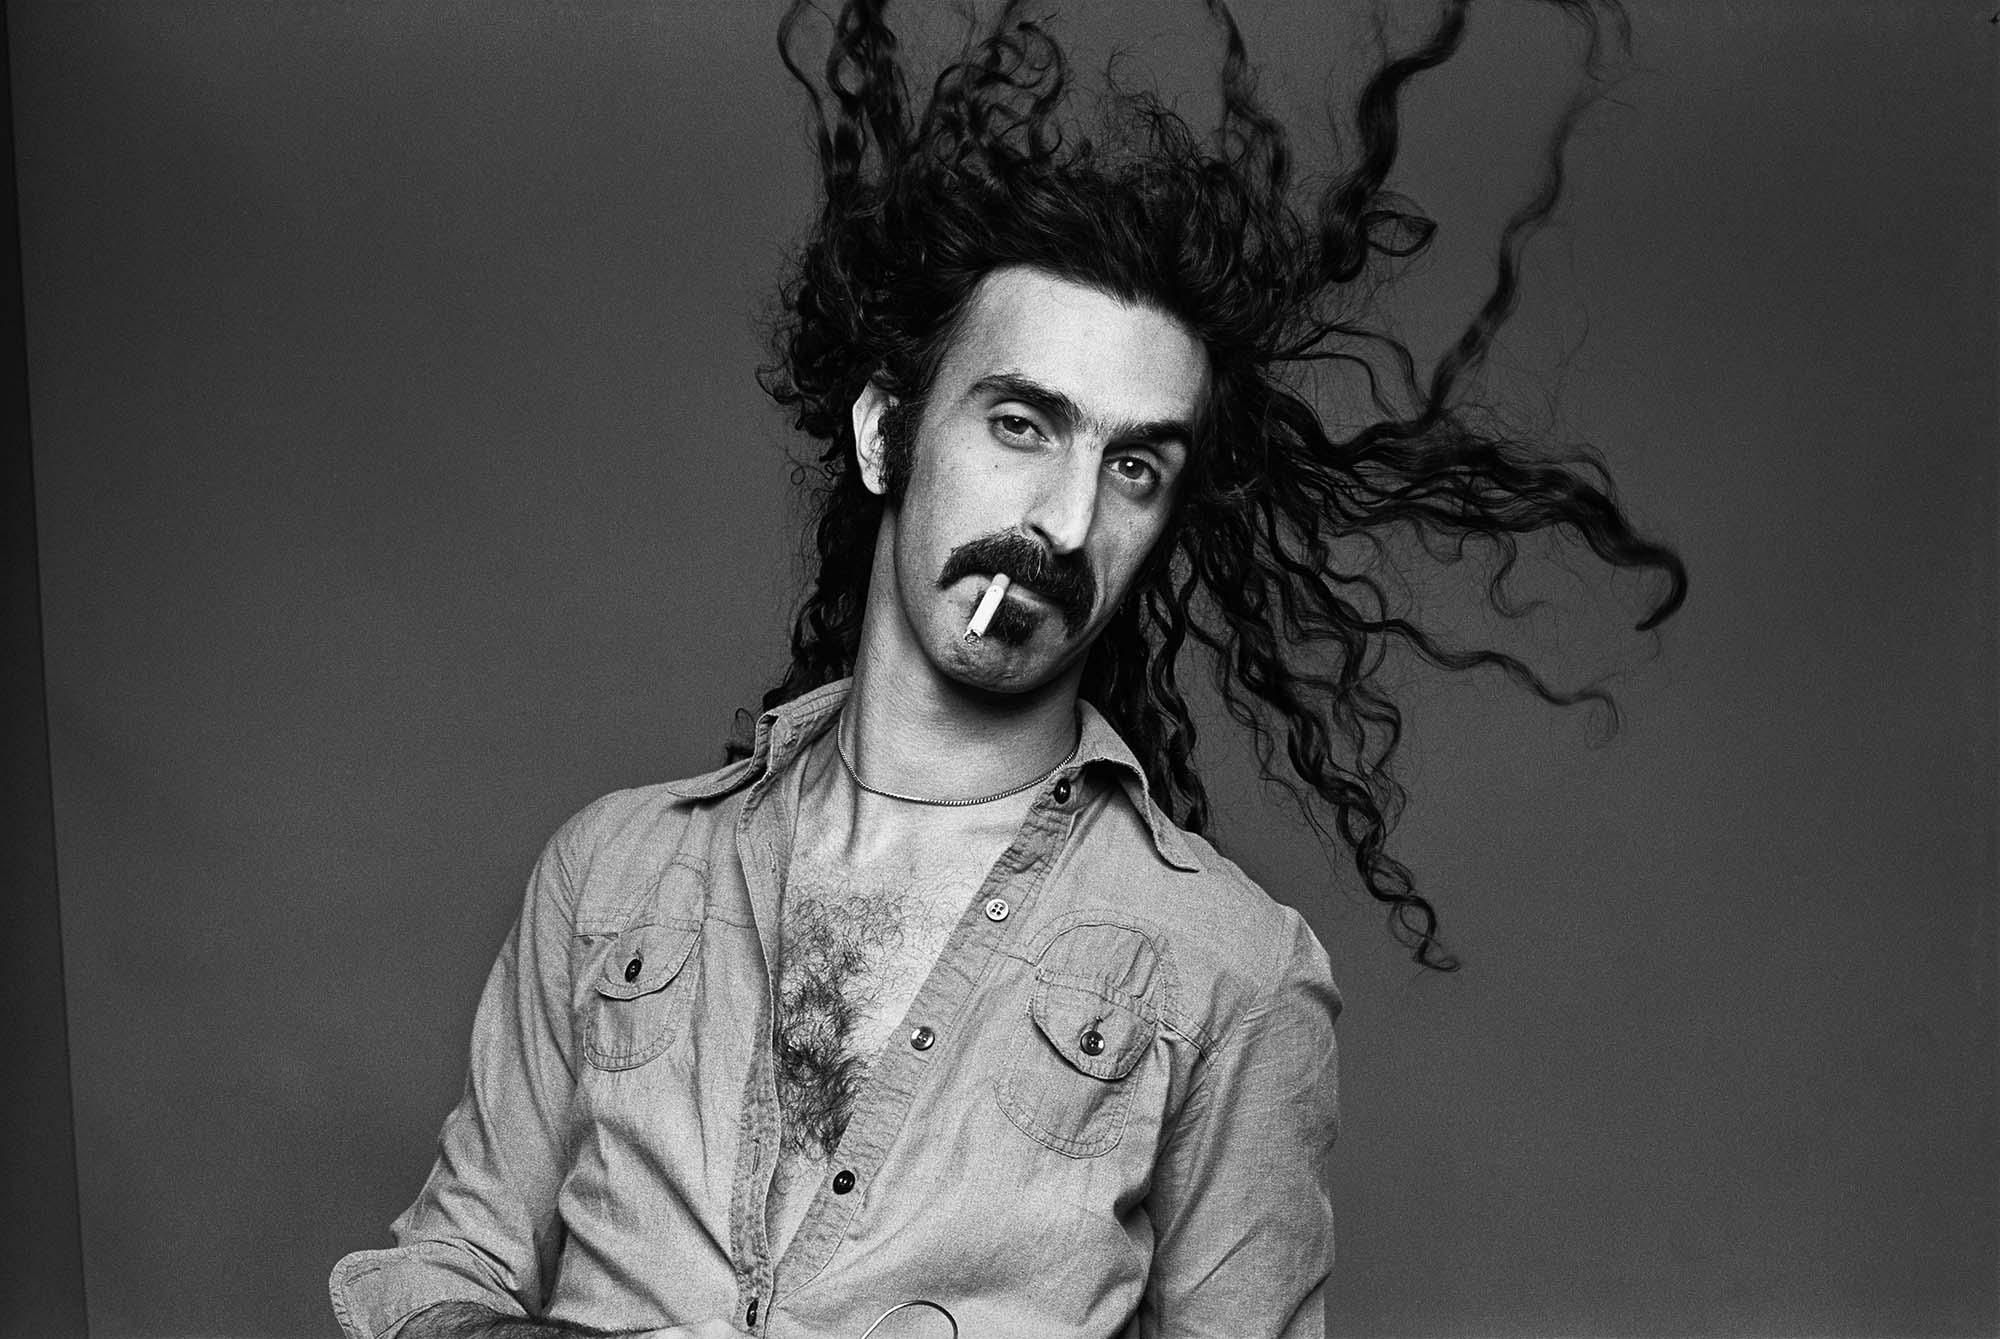 13 Facts About Frank Zappa - Facts.net